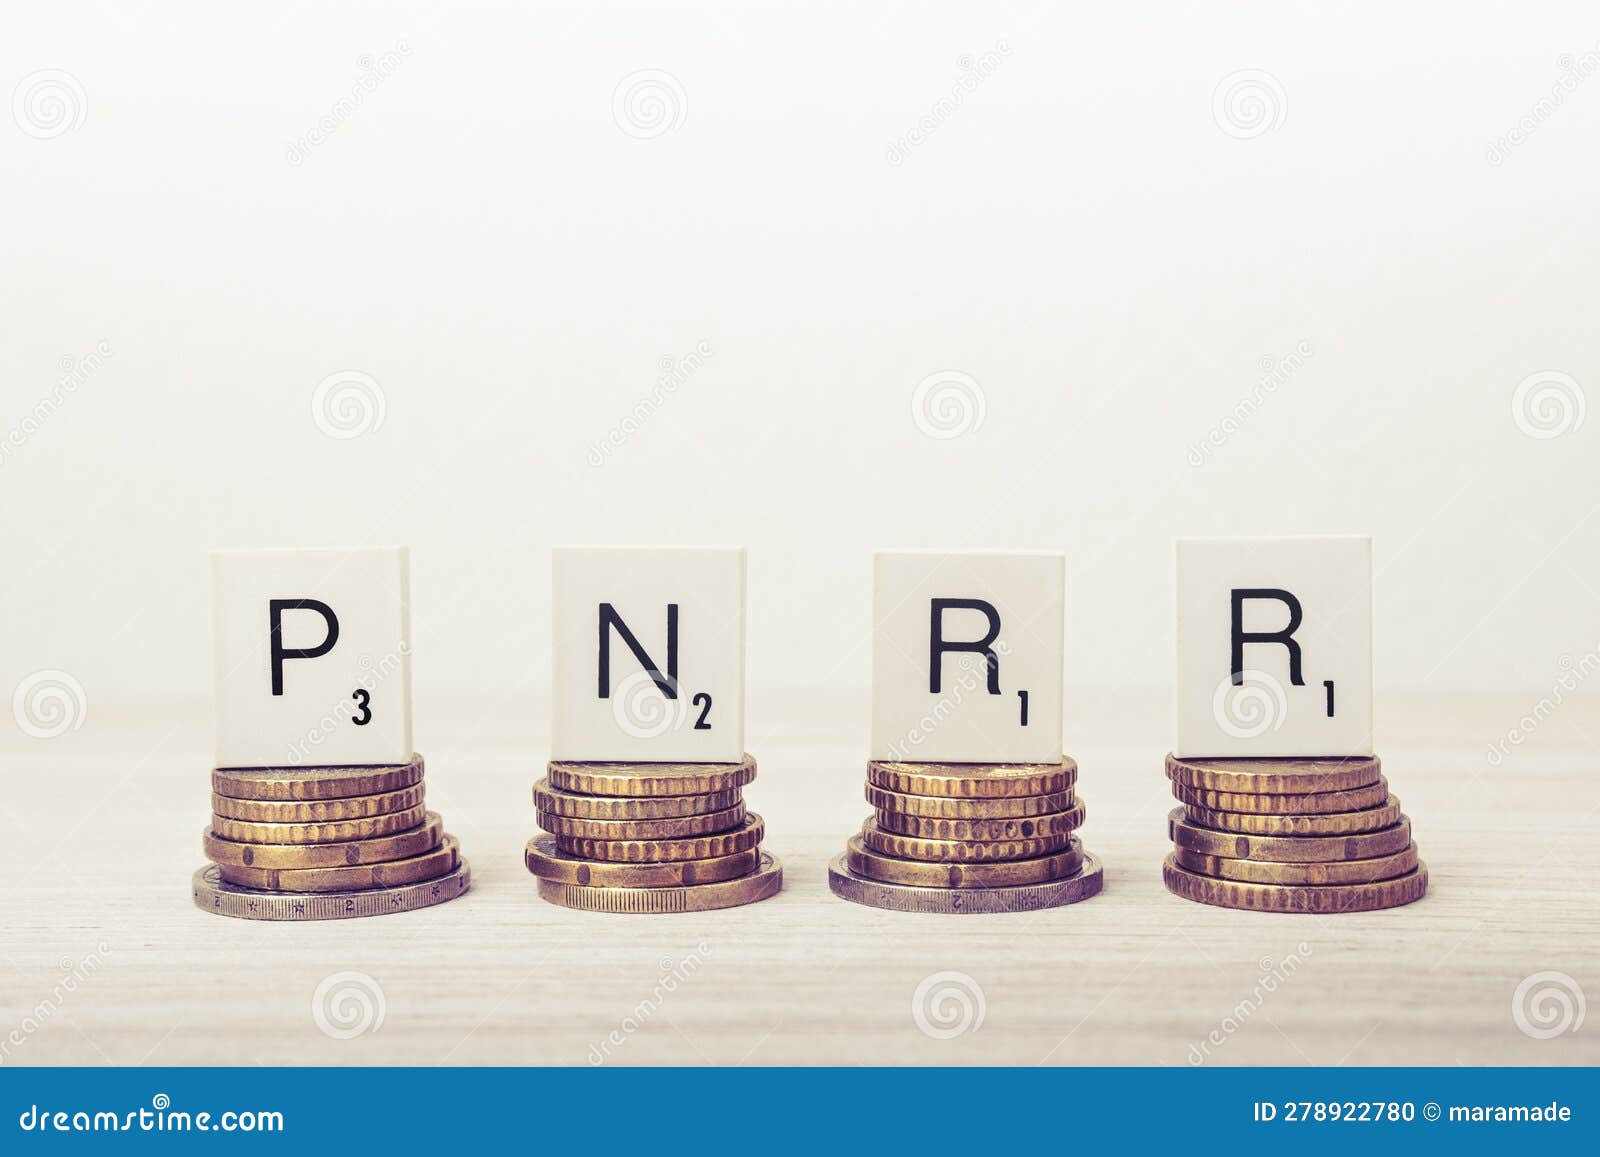 stacks of coins with pnrr letters. ue economy concept.